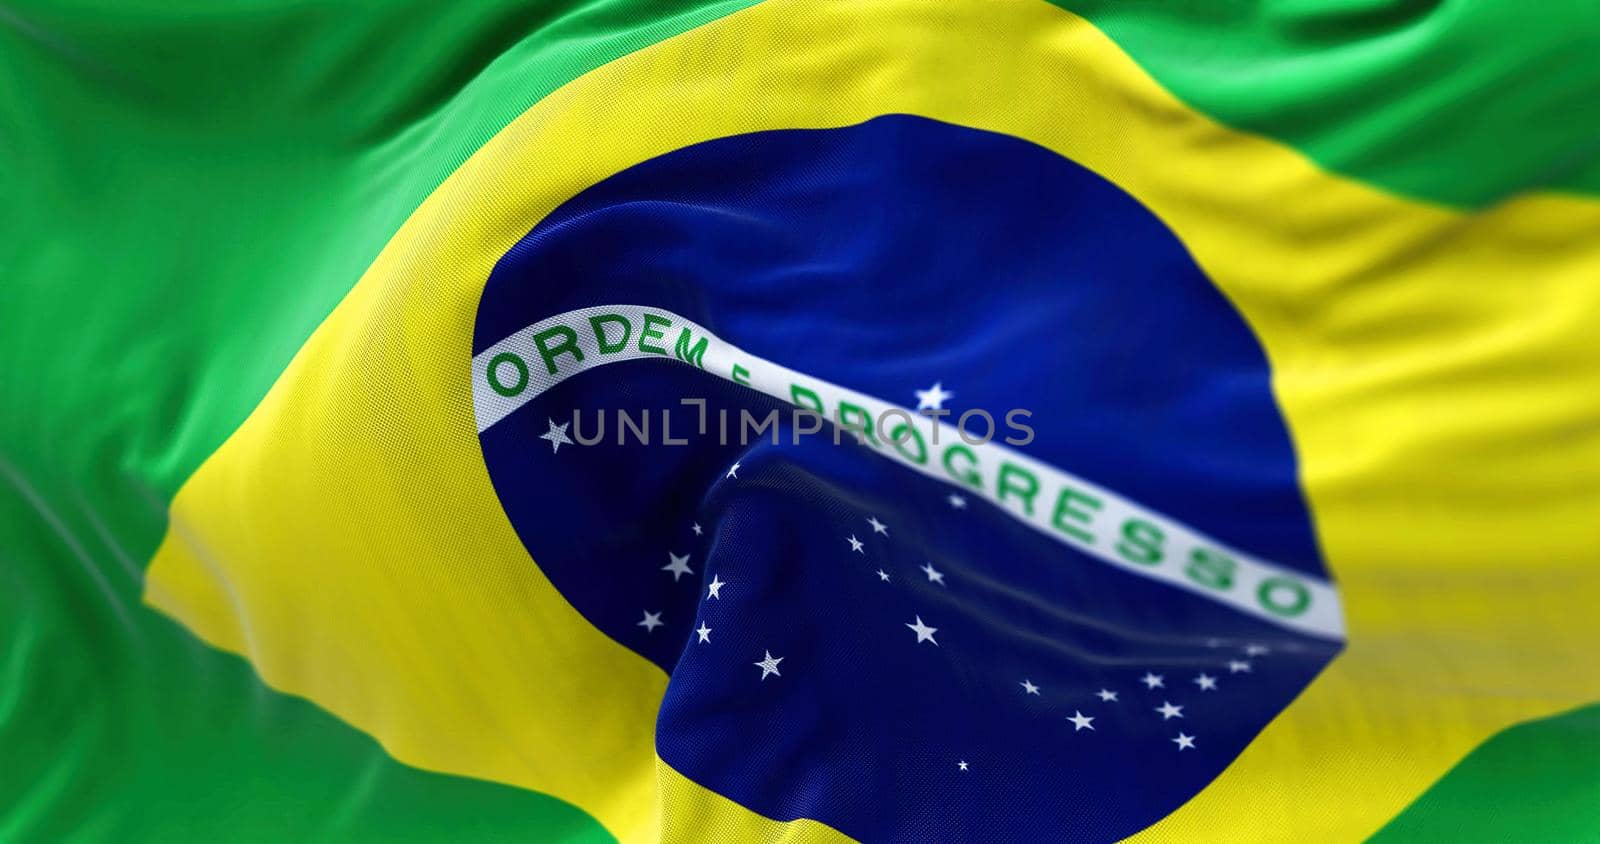 Close-up view of the Brazilian national flag waving in the wind. Brazil is a South American country.